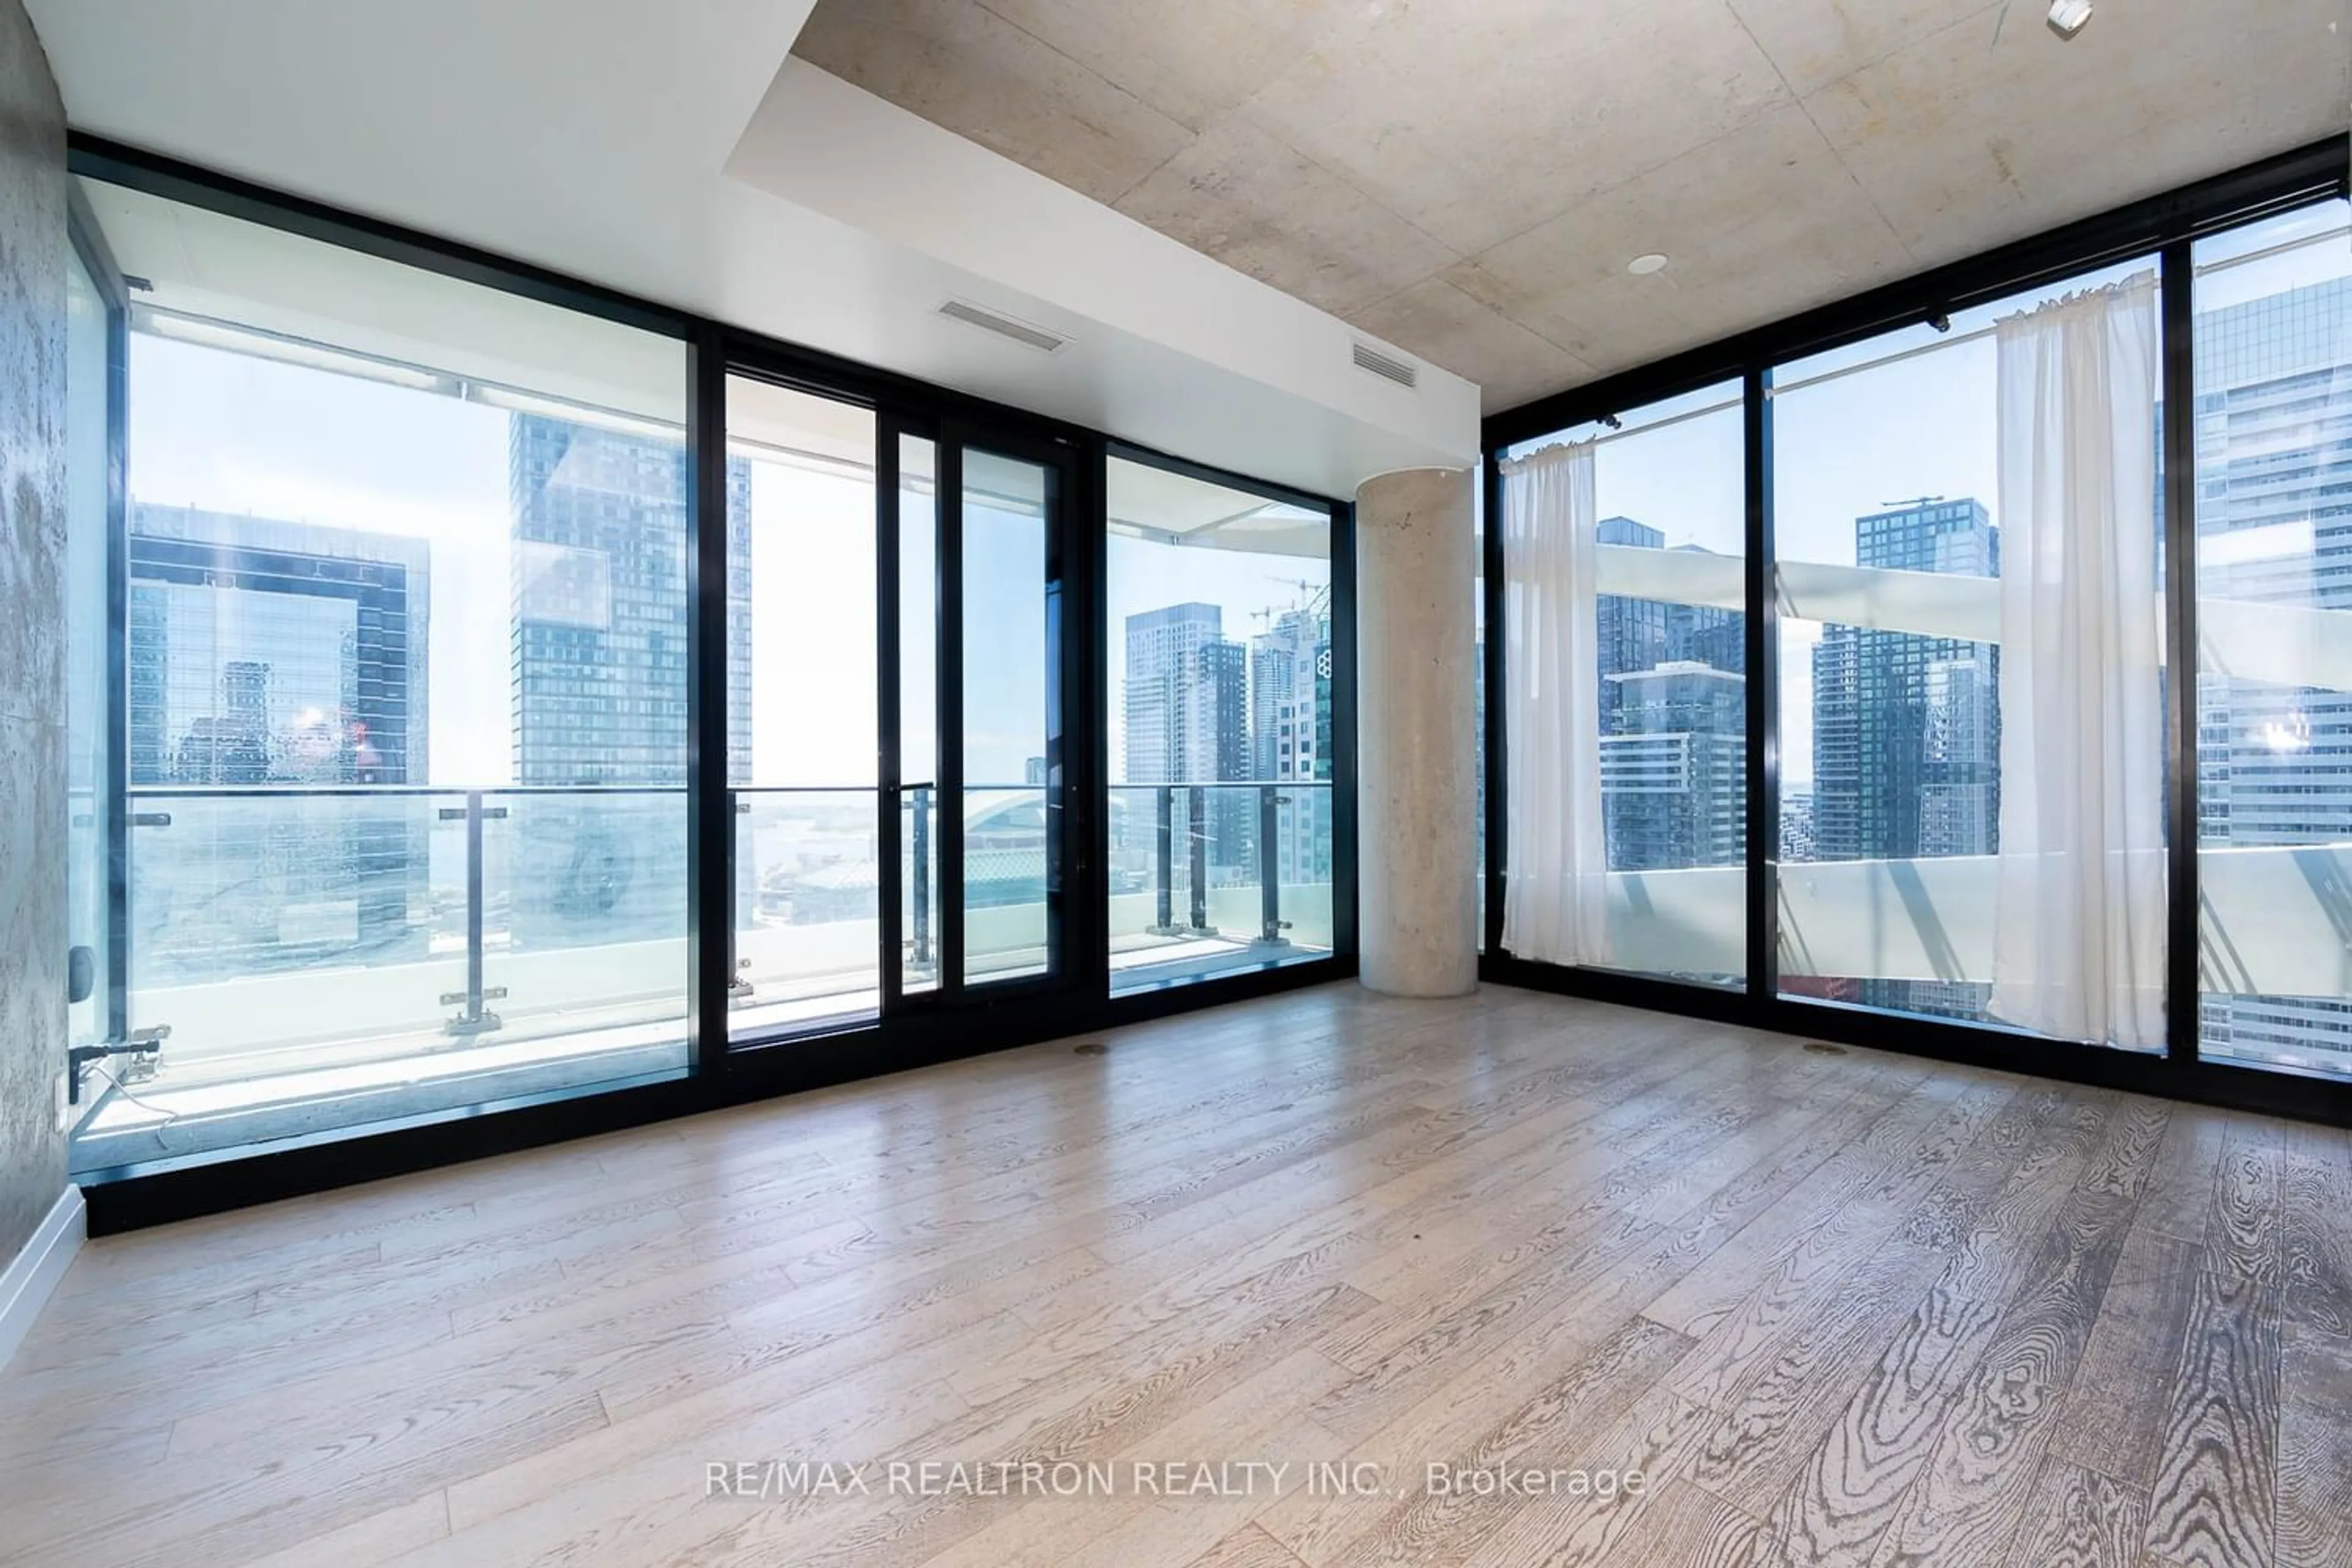 Other indoor space for 224 King St #2606, Toronto Ontario M5H 0A6